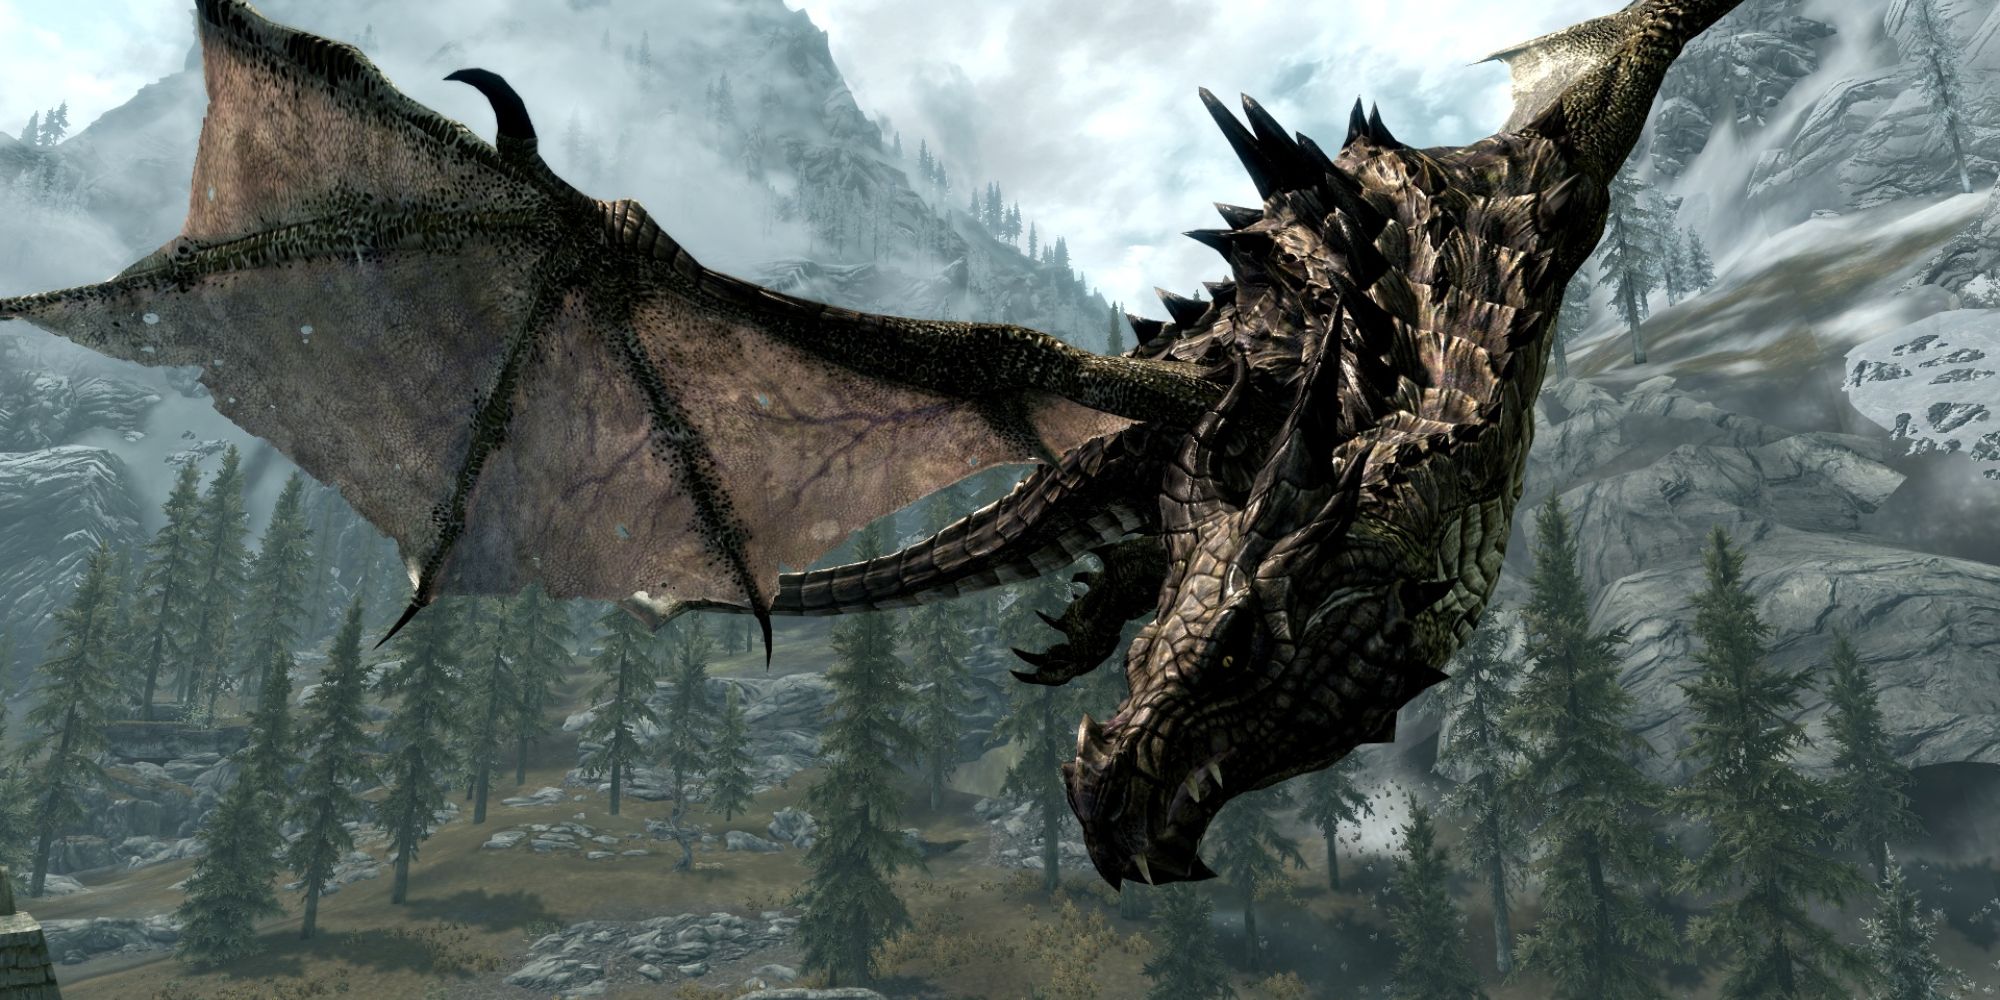 Skyrim Players Share Their Most Unpopular Opinions